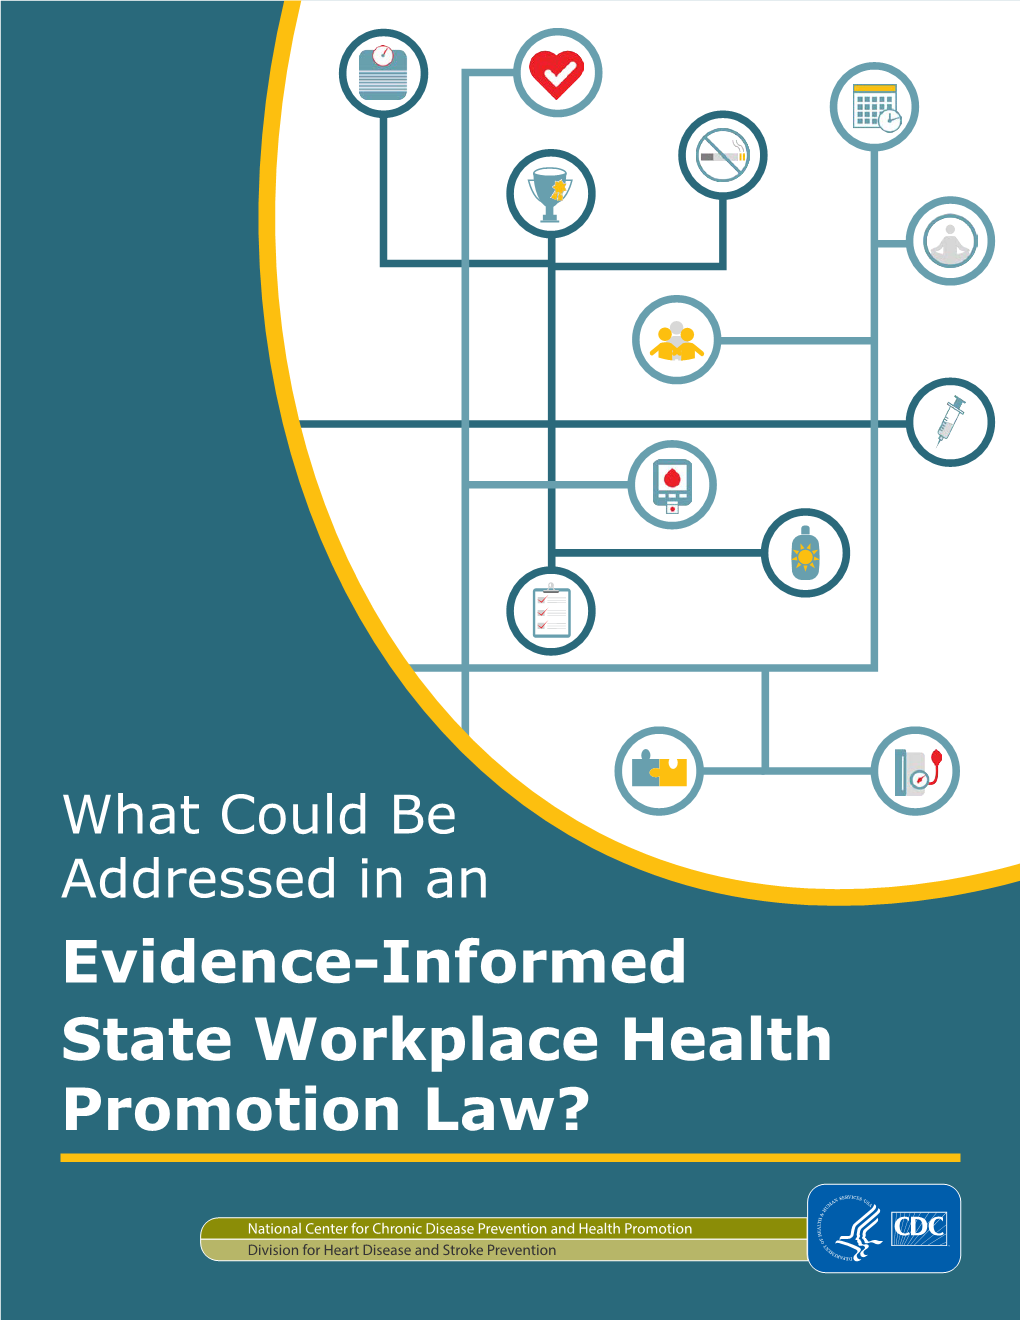 Evidence-Informed State Workplace Health Promotion Law?